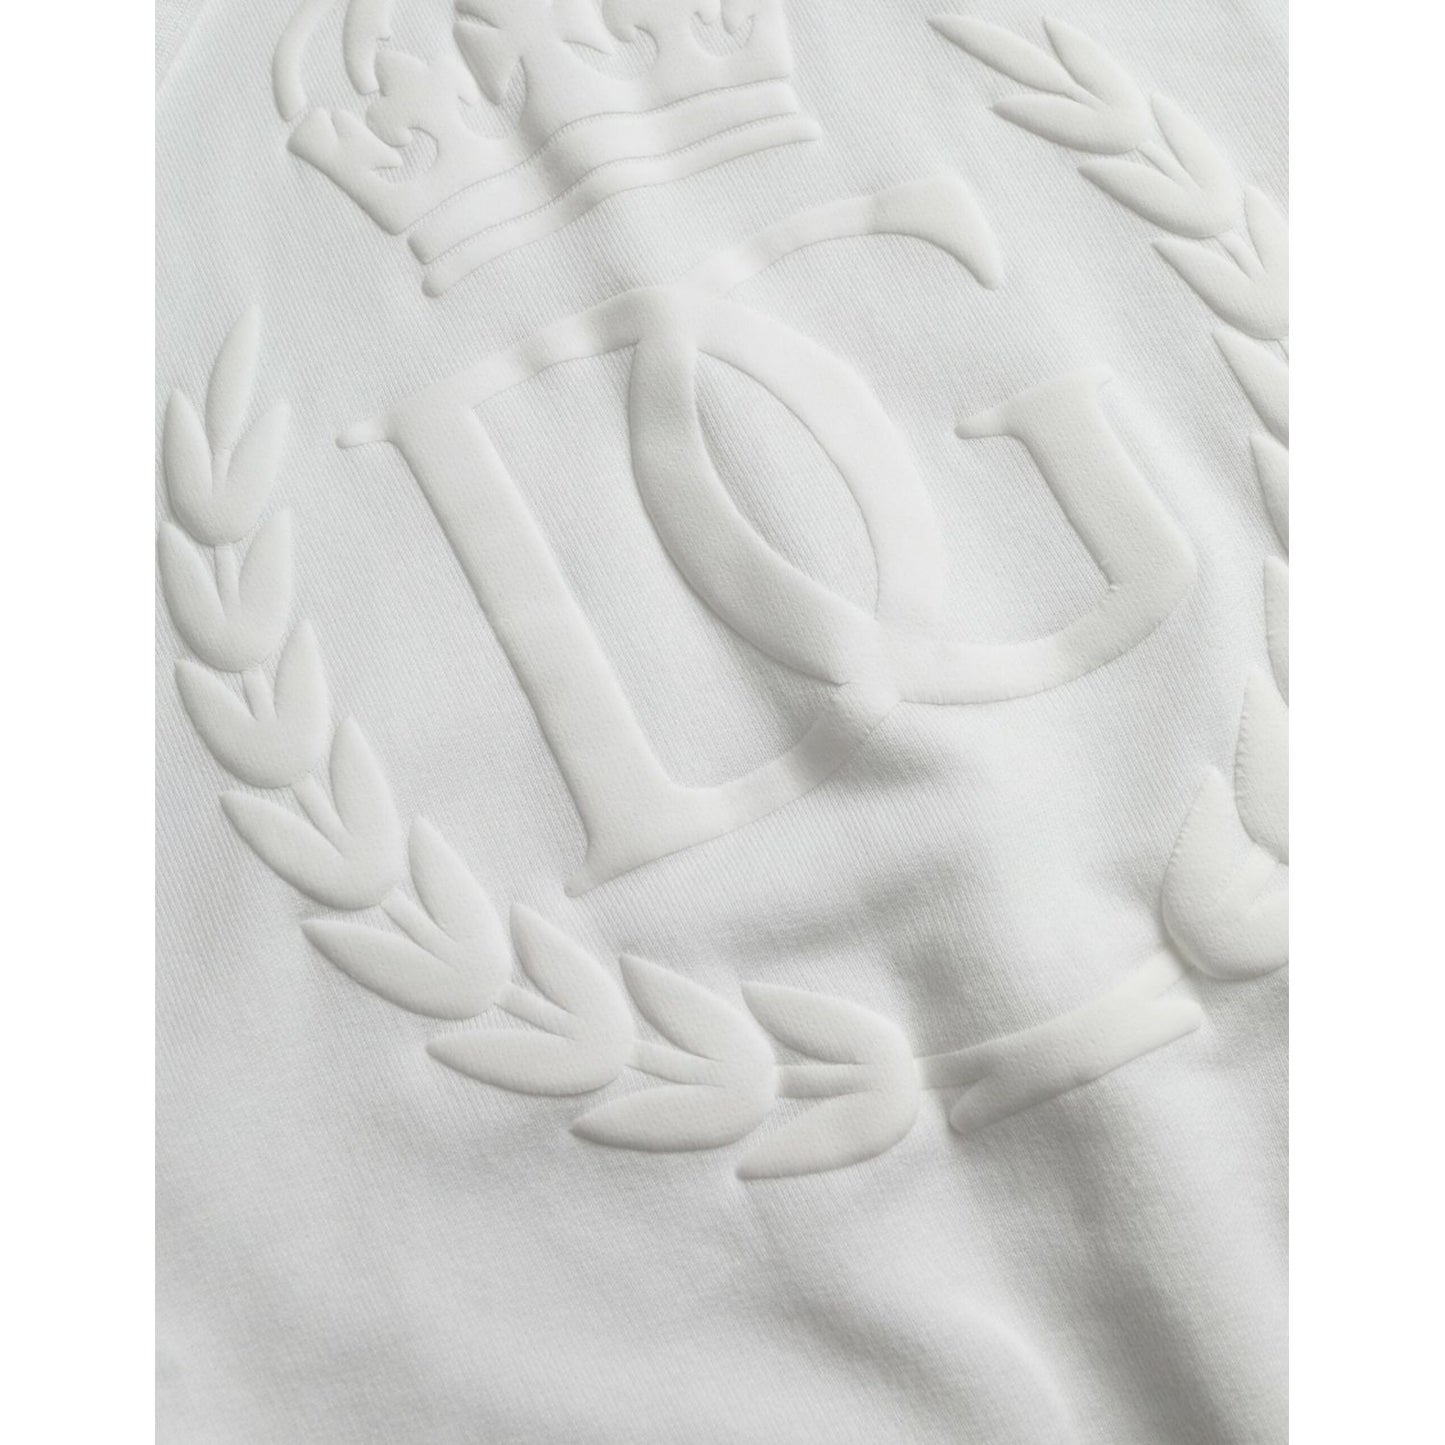 Dolce & Gabbana White Cotton Hooded Pullover Sweatshirt Sweater white-cotton-hooded-pullover-sweatshirt-sweater